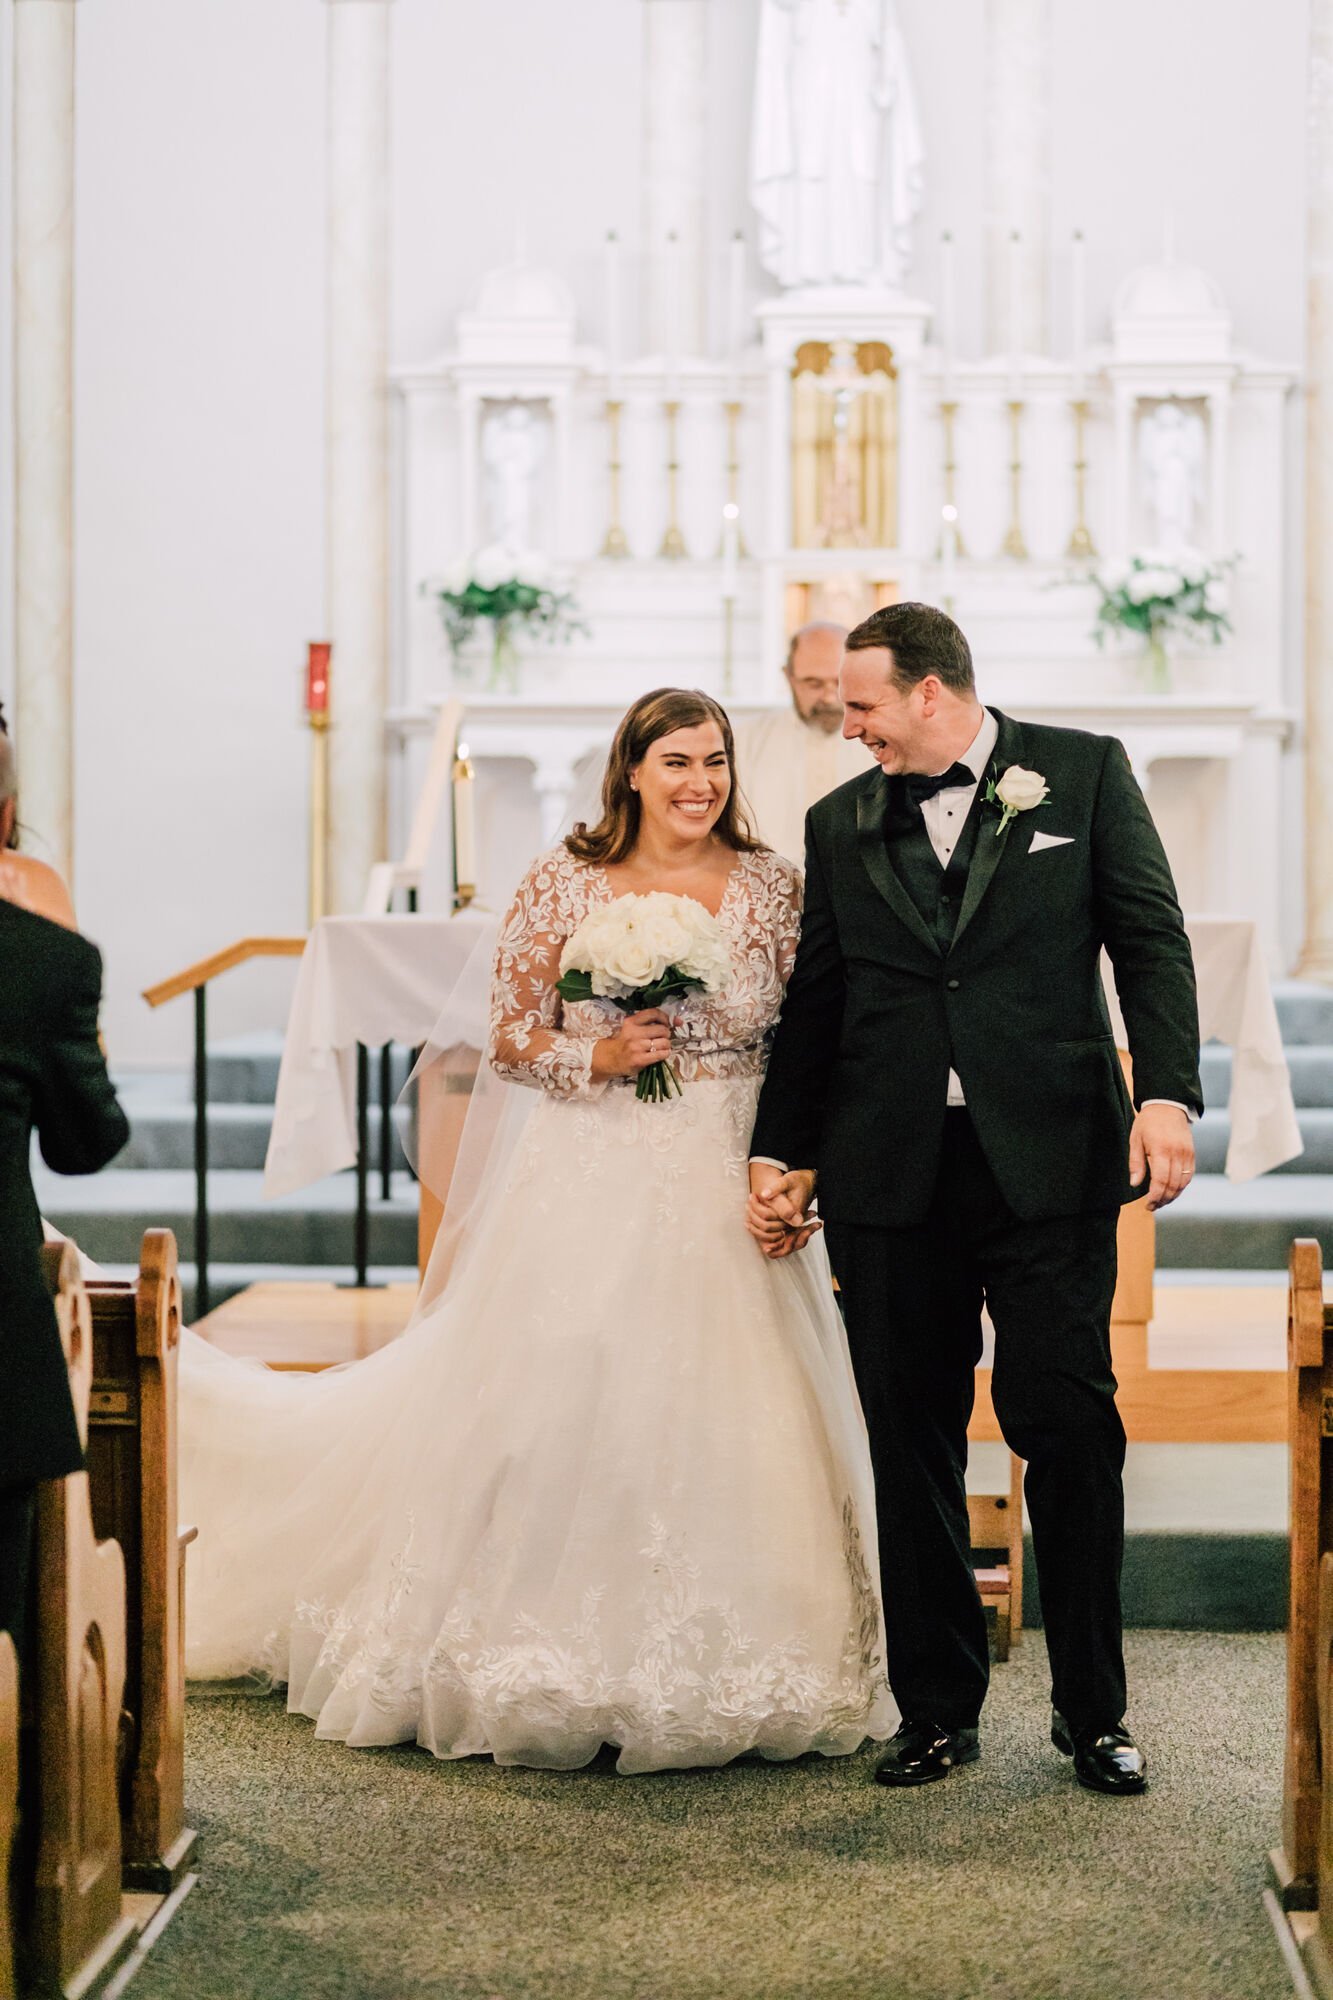  Bride and groom smile at the end of their ceremony in upstate ny wedding 